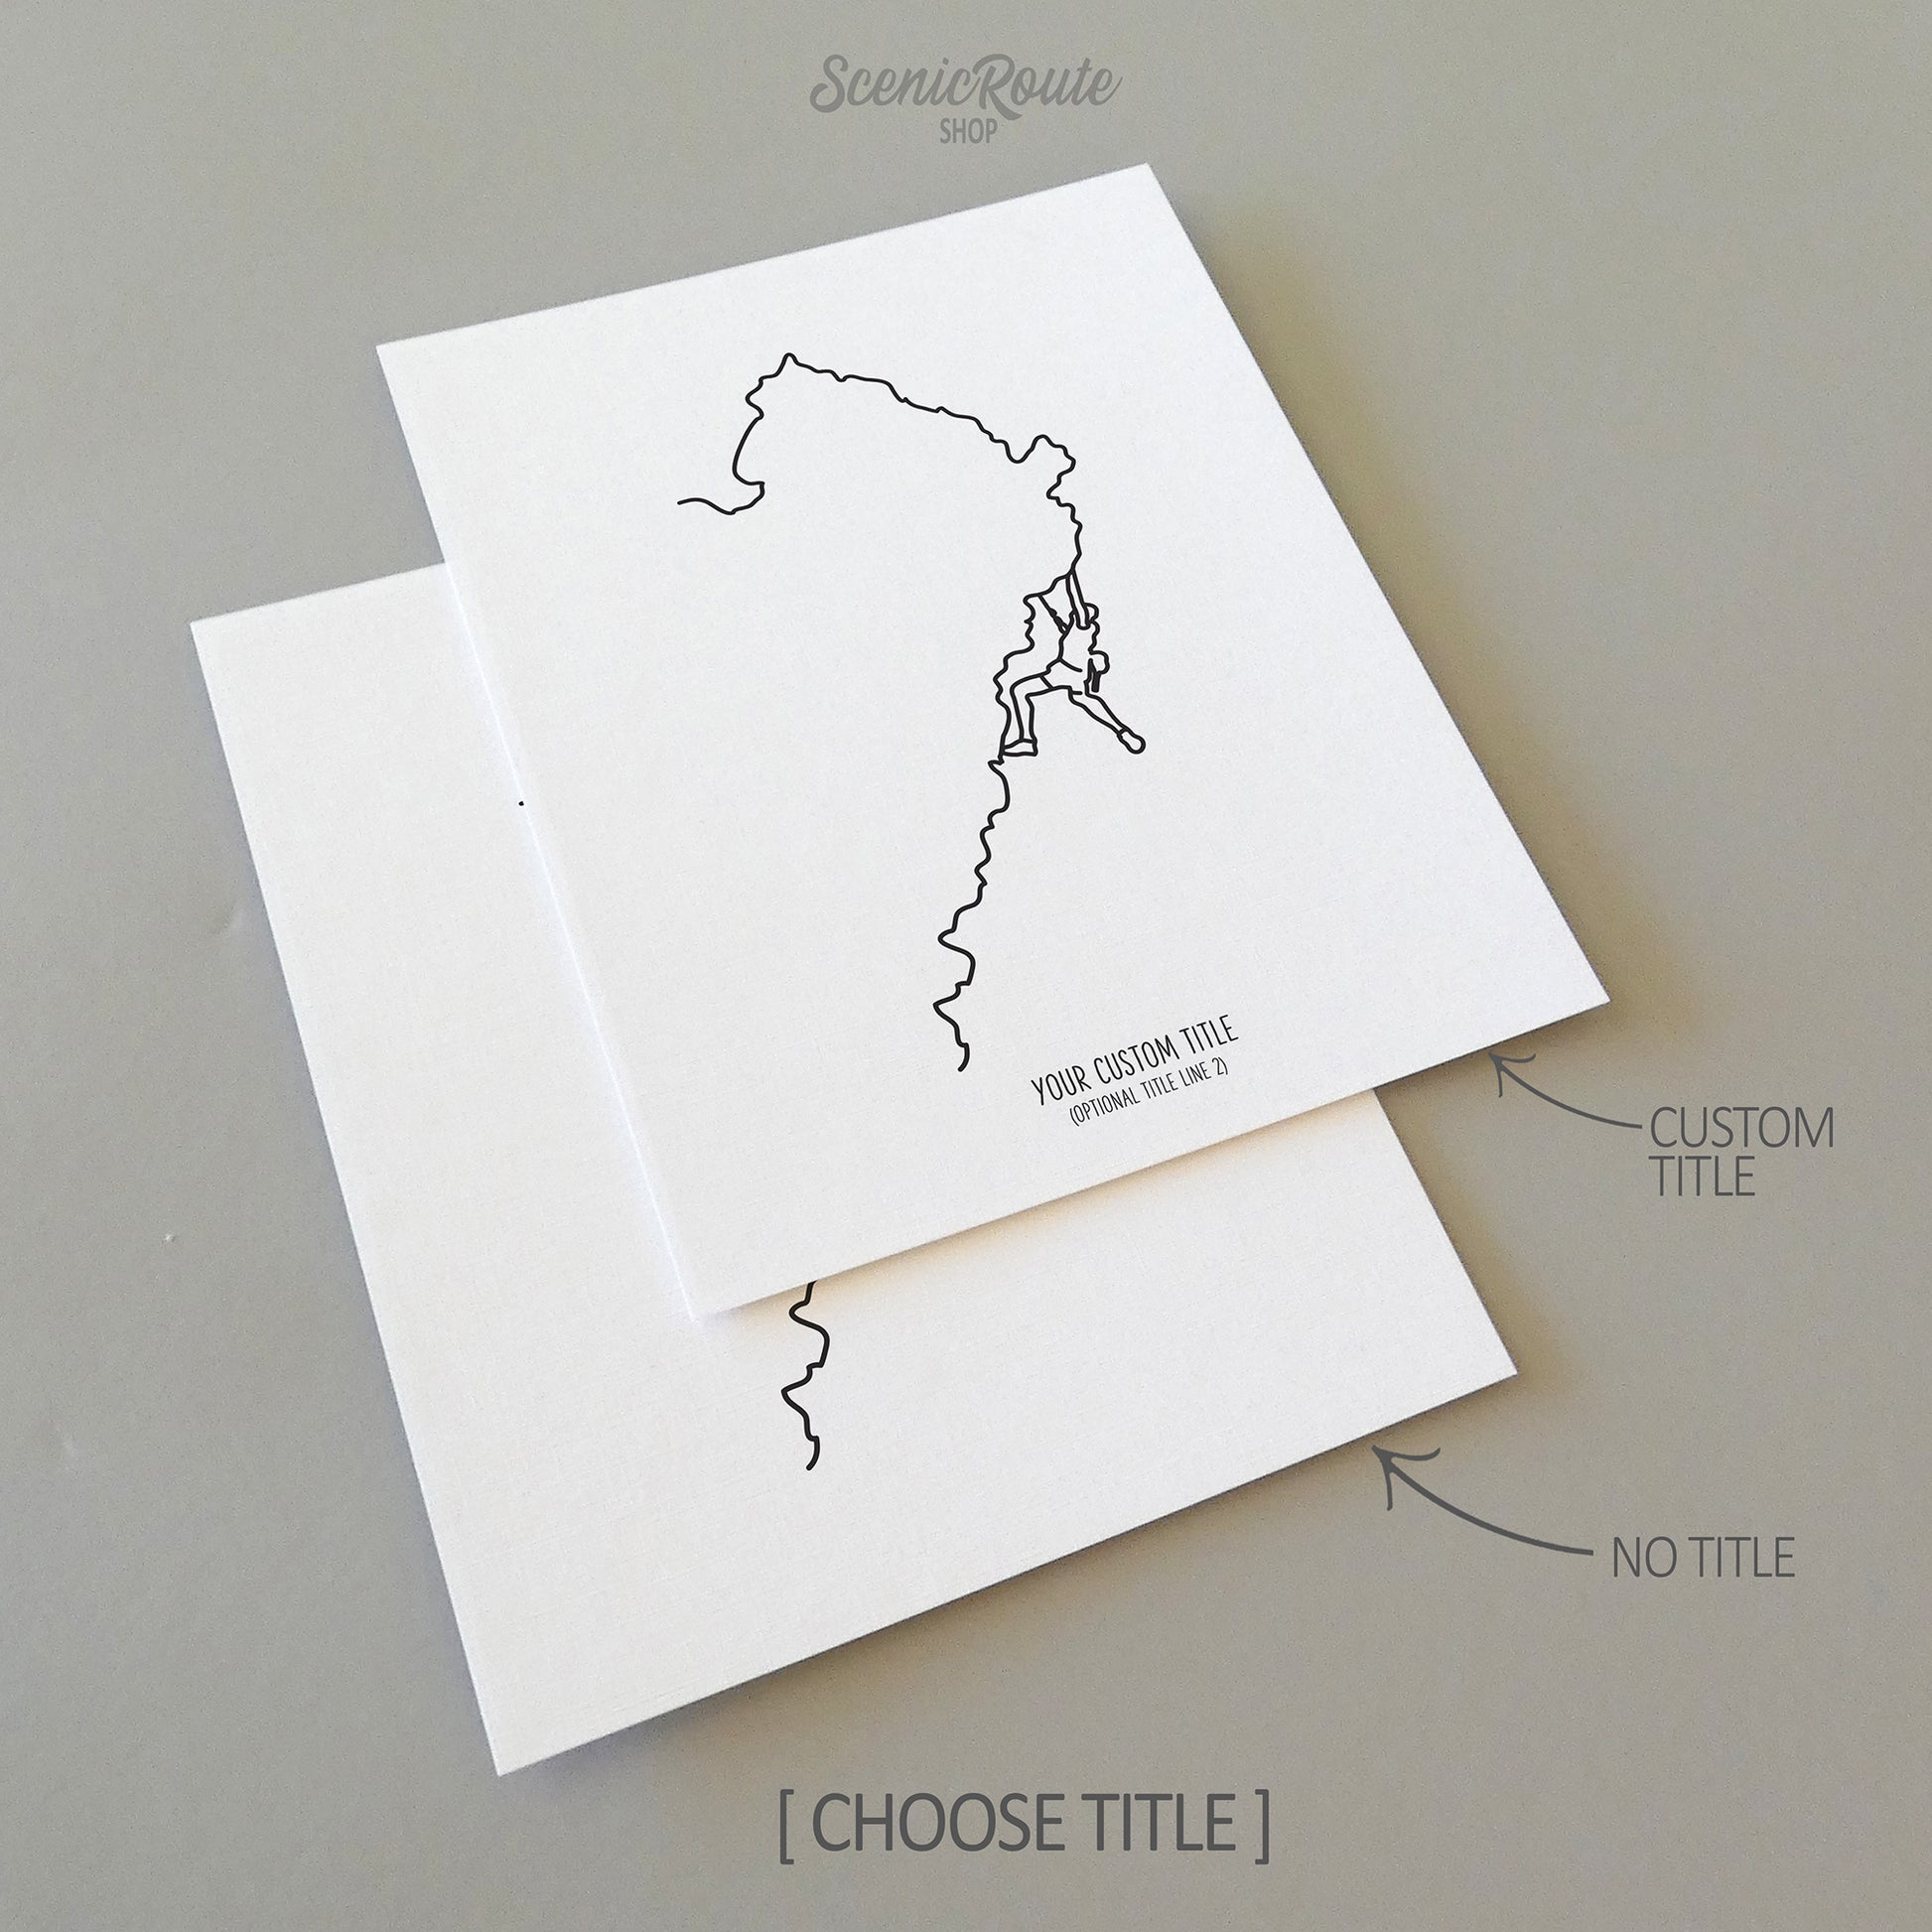 Two line art drawings of a climber Rock Climbing on white linen paper with a gray background.  The pieces are shown with “No Title” and “Custom Title” options for the available art print options.